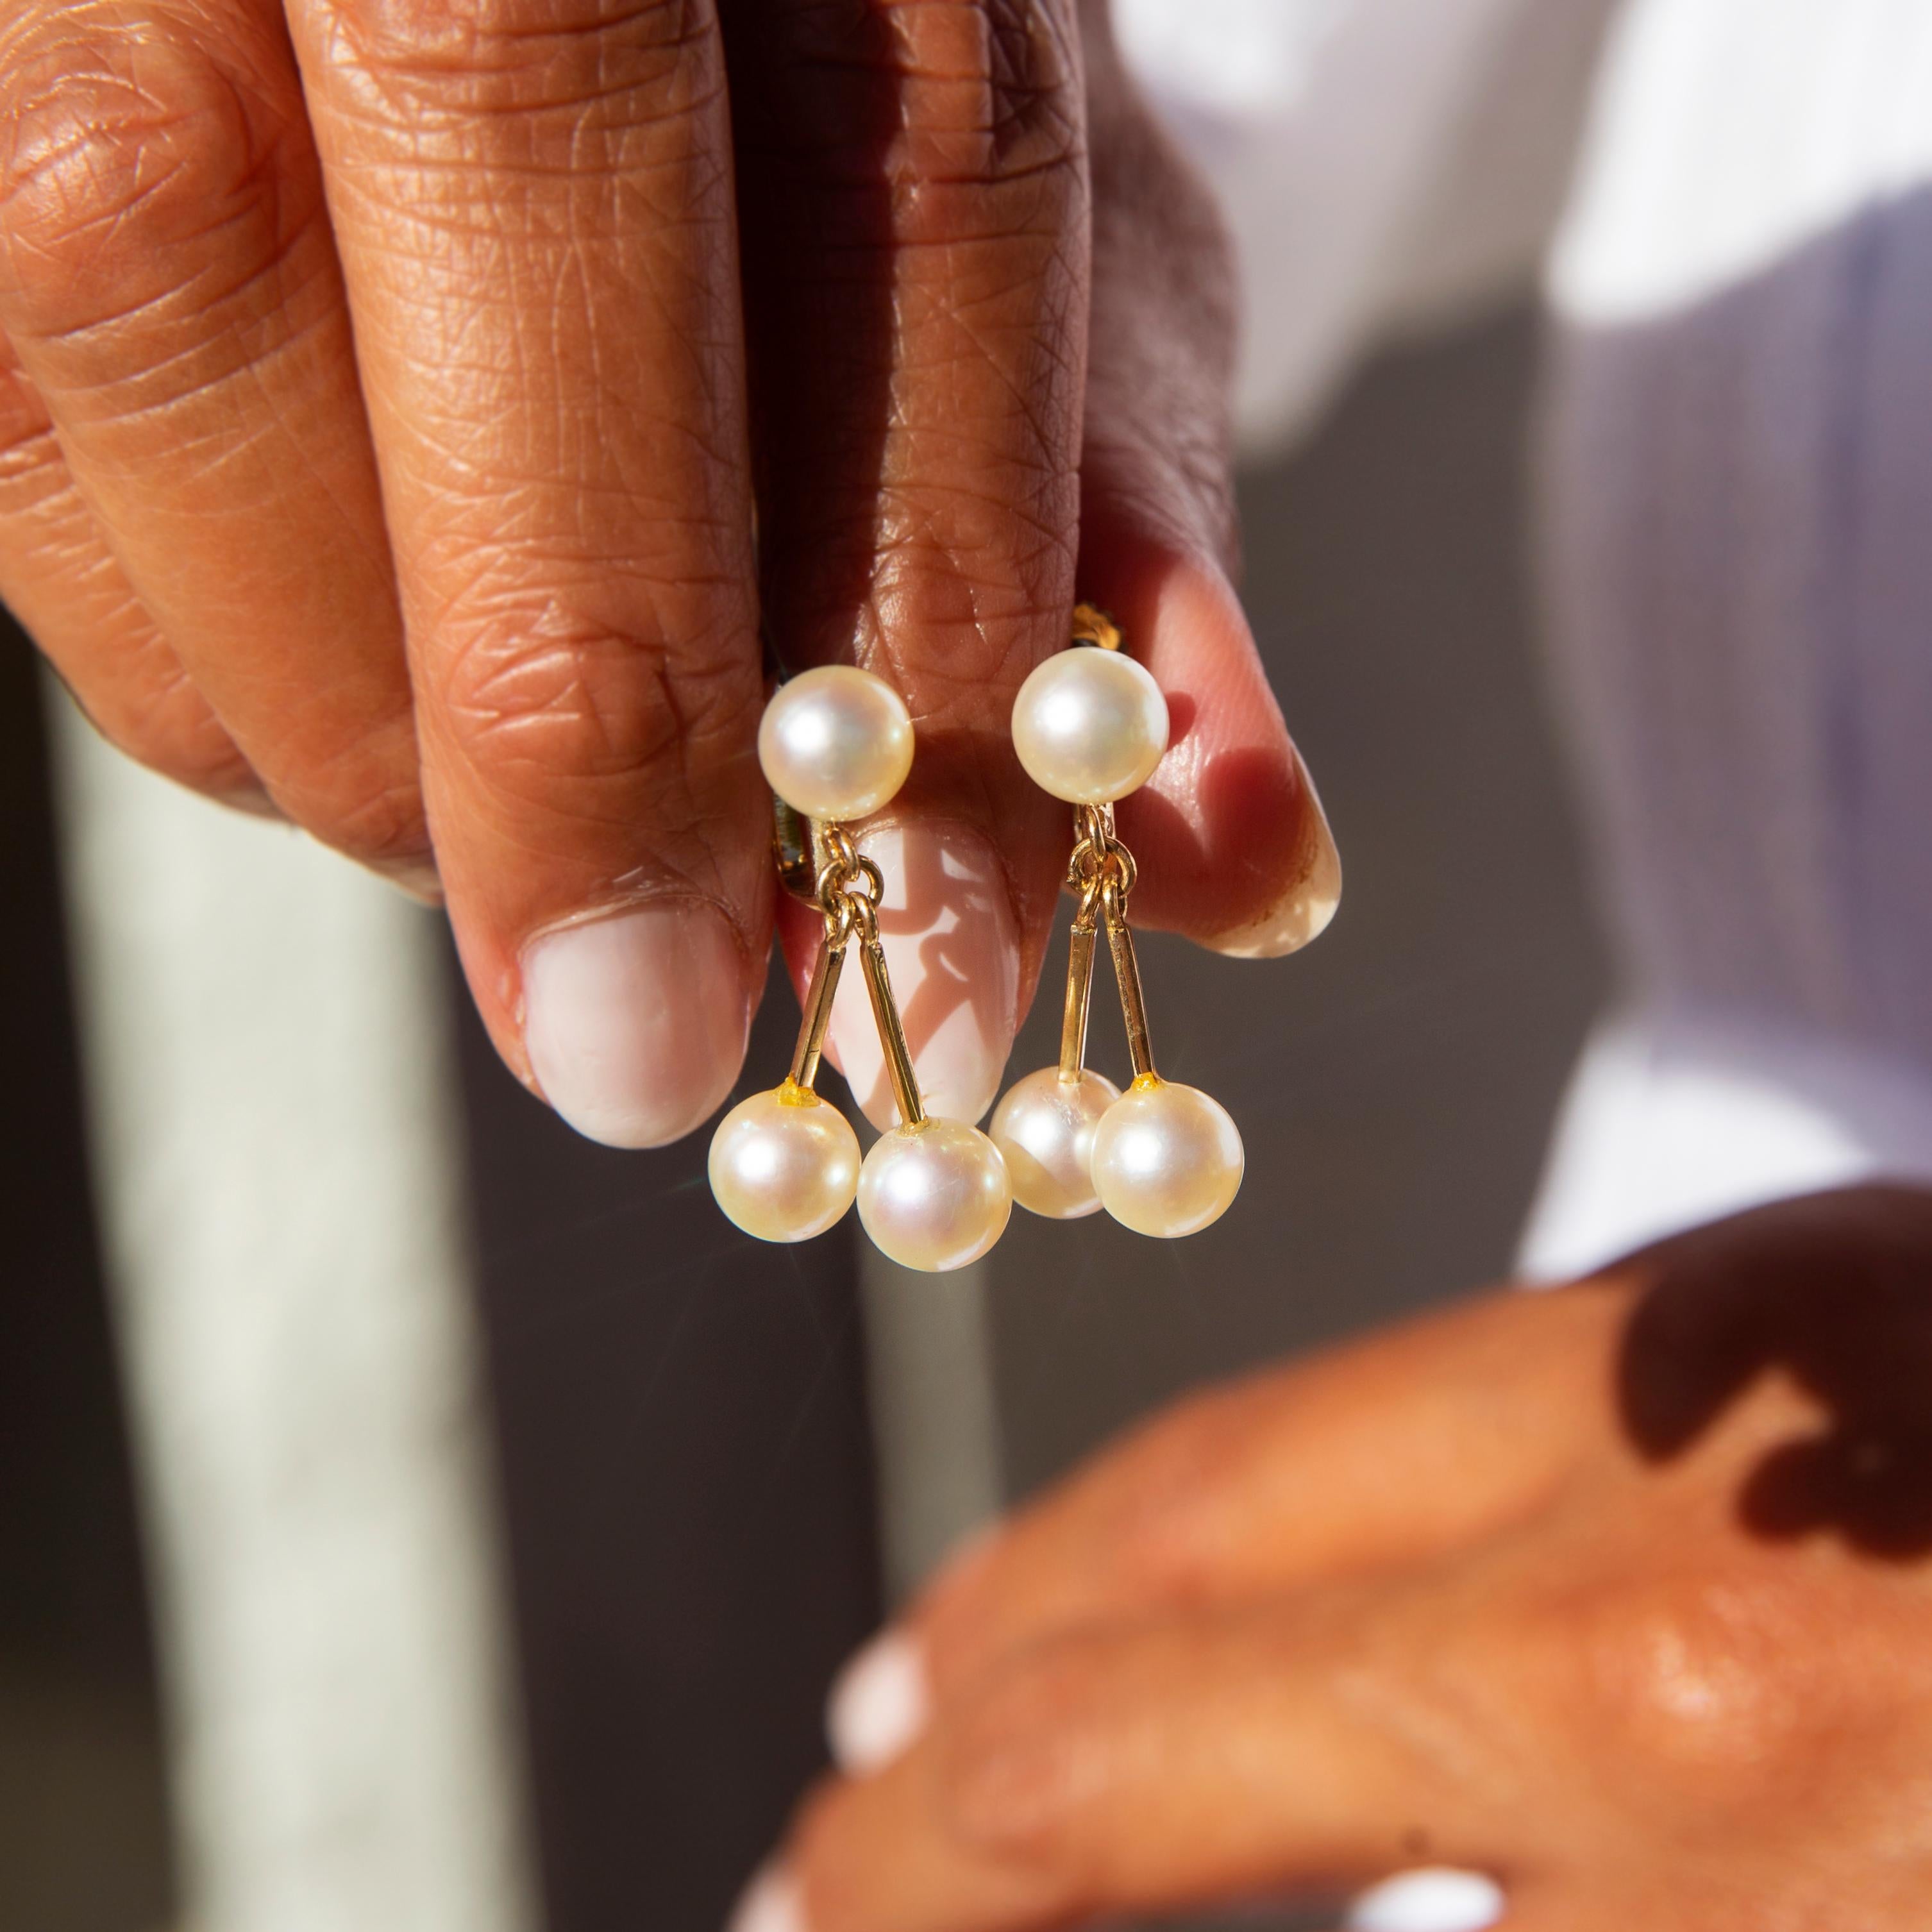 Crafted in 14 carat yellow gold, these elegant vintage clip-on earrings each feature a high luster round cultured pearl attached to a stud clip and two additional pearls suspended on gold bars. The Kiera Earrings are elegant and quietly beautiful,